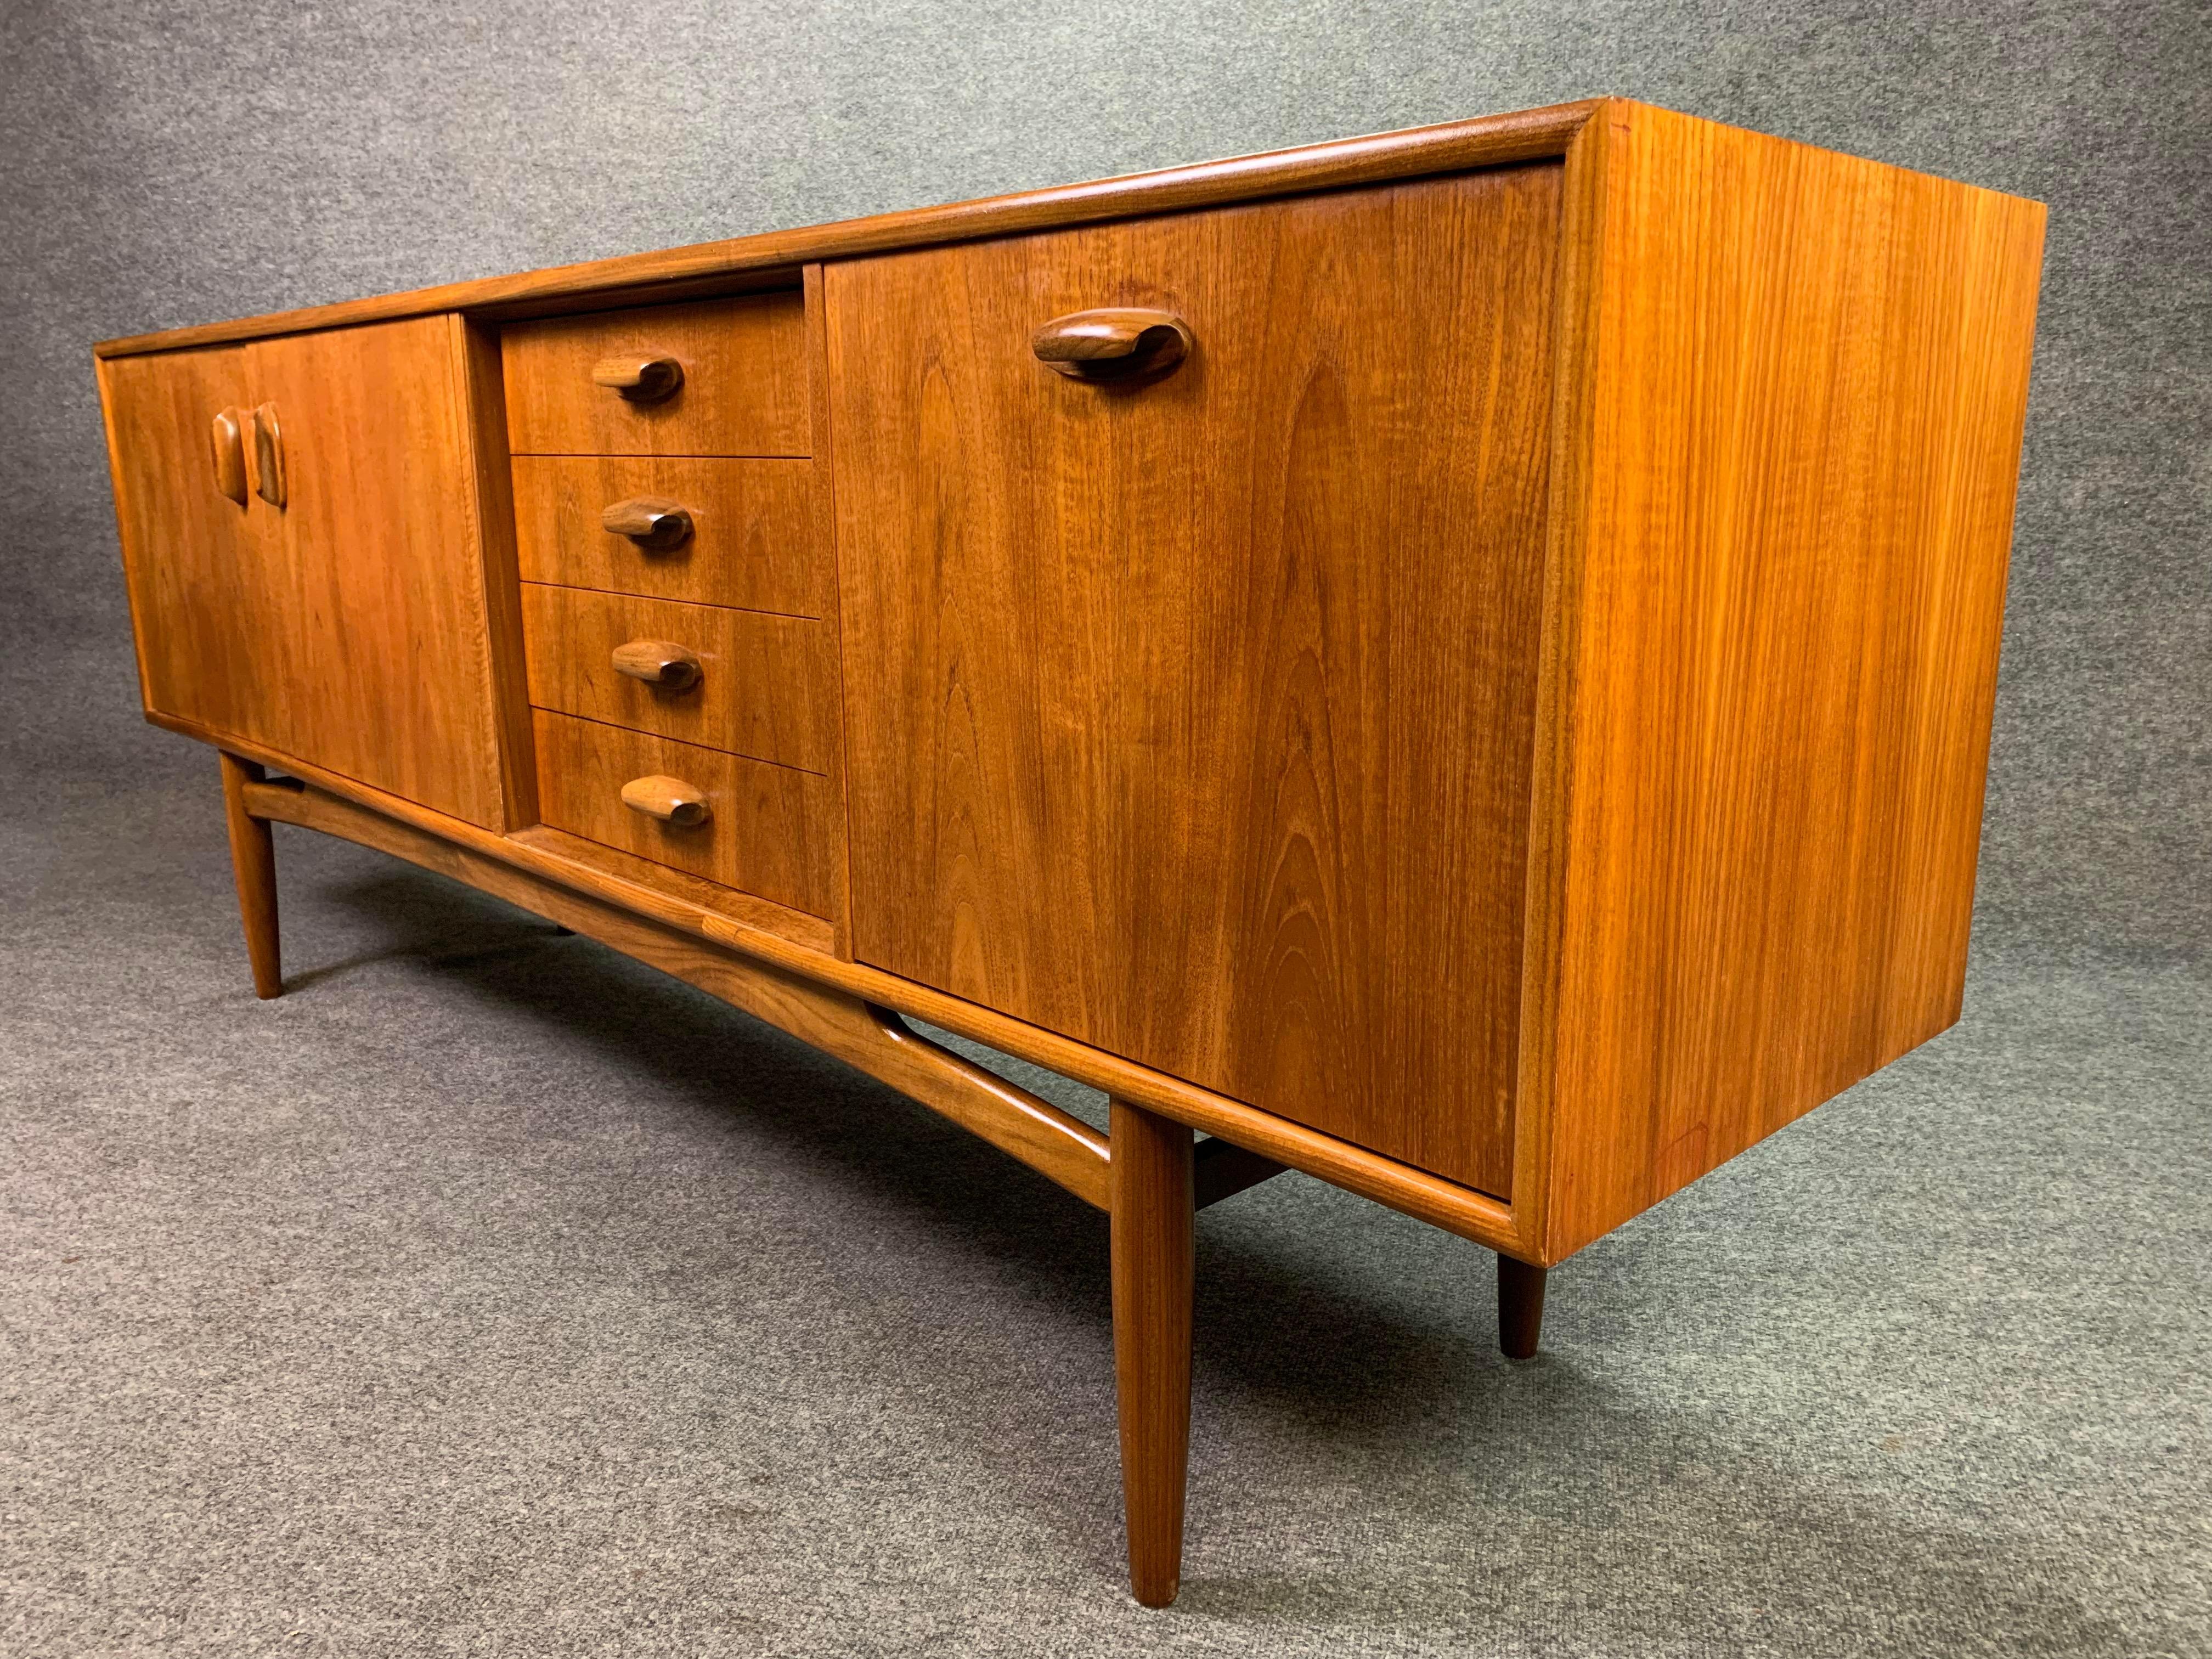 Here is a vintage british modern teak sideboard Circa 1960's designed by Victor Wilkins and manufactured by G plan in England. 
This beautiful case good, recently imported from Europe to California before its refinishing, features a vibrant teak